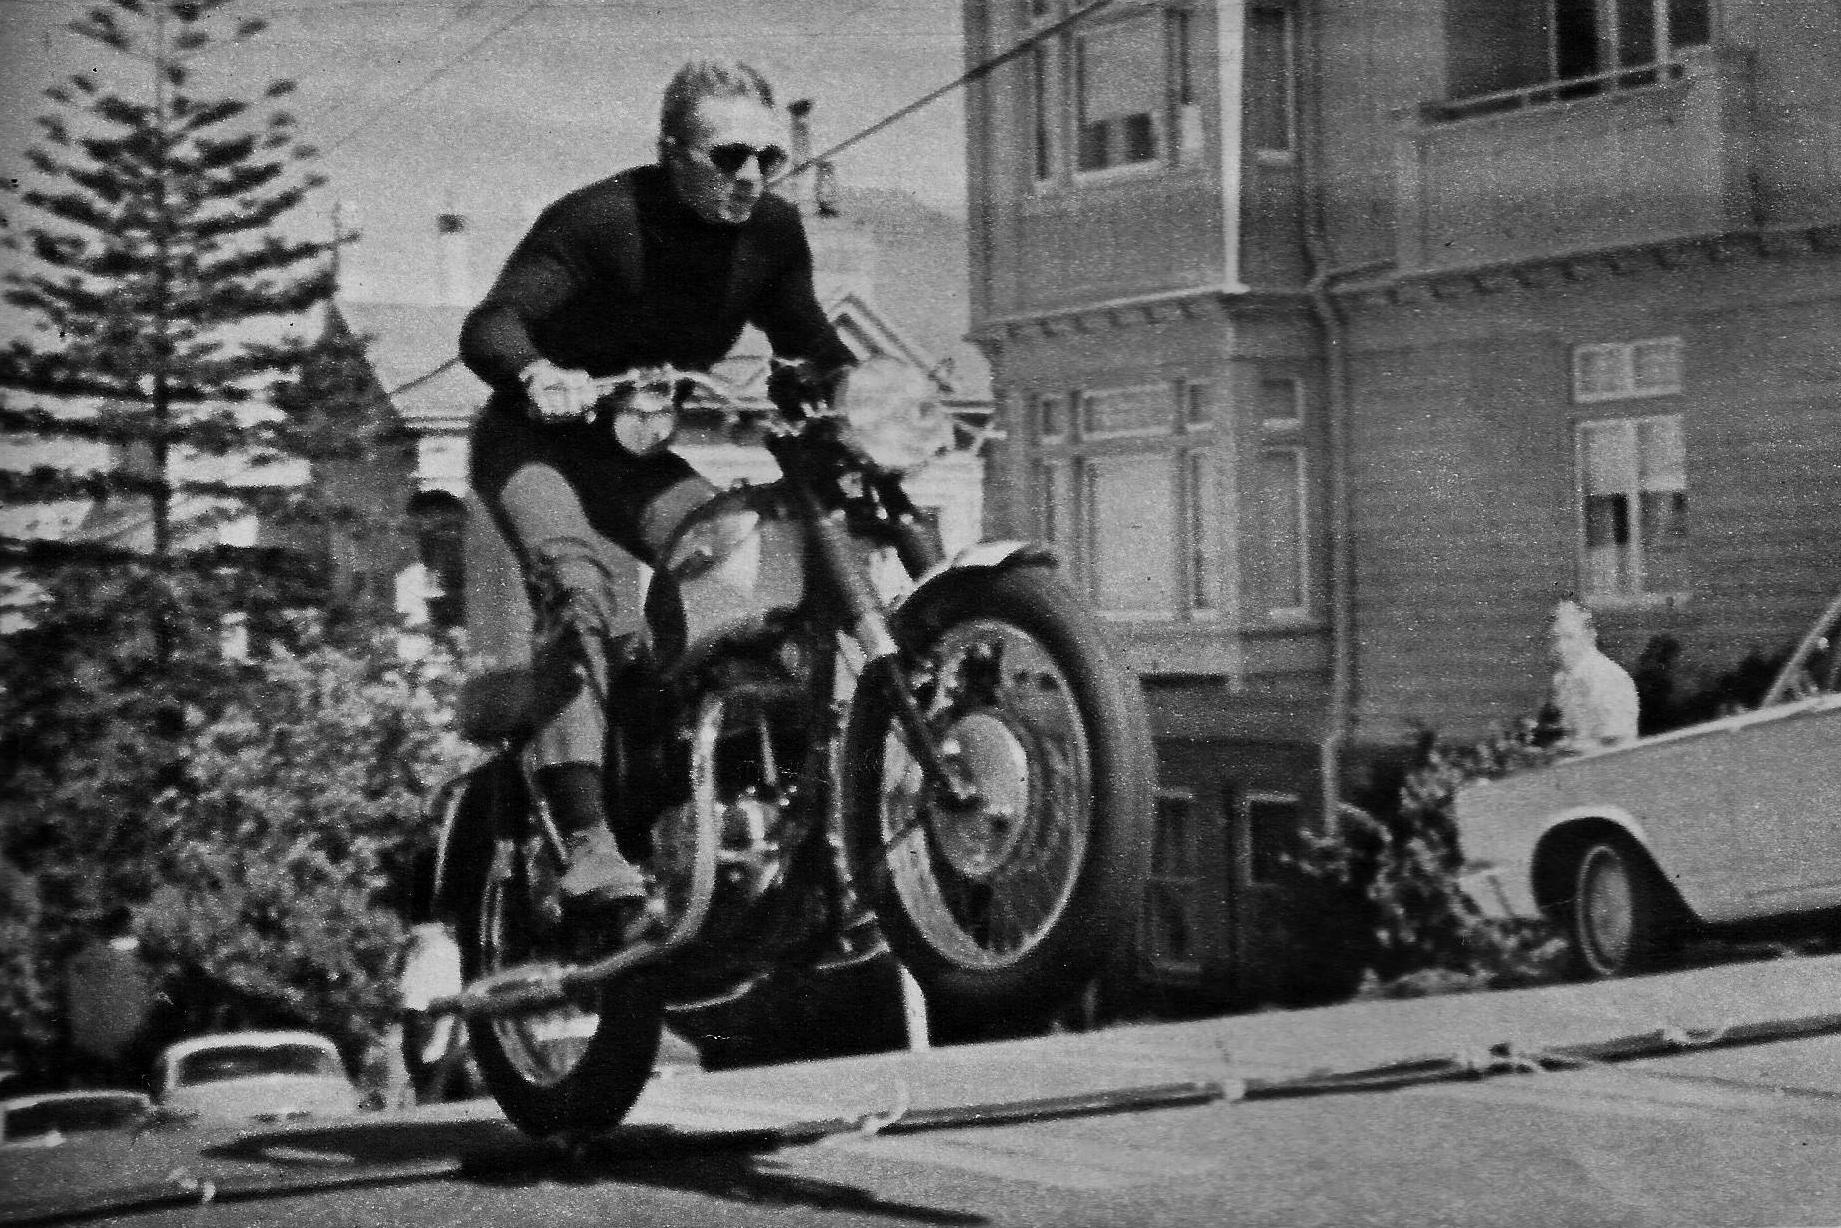 The Day I Met Steve McQueen by Tony Piazza. Author Tony Piazza